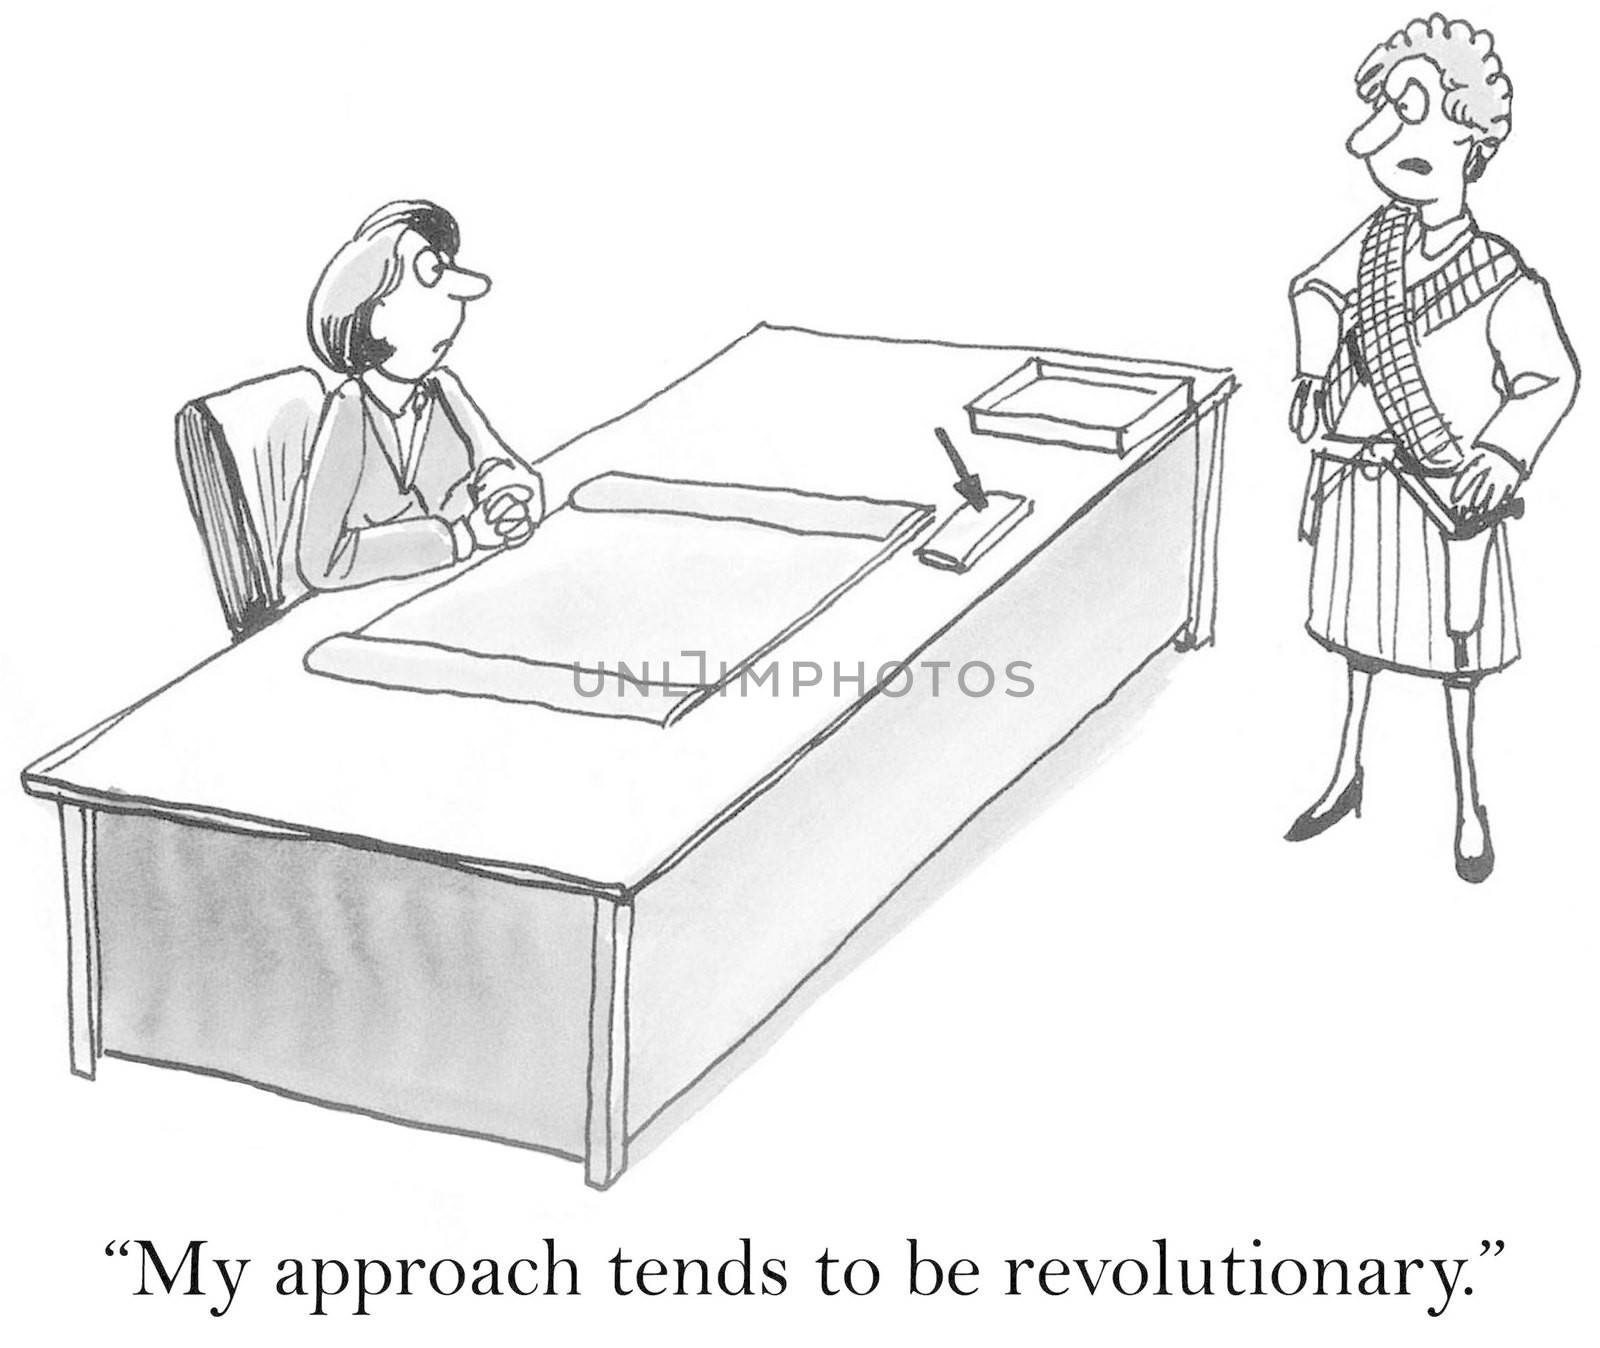 "My approach tends to be revolutionary."